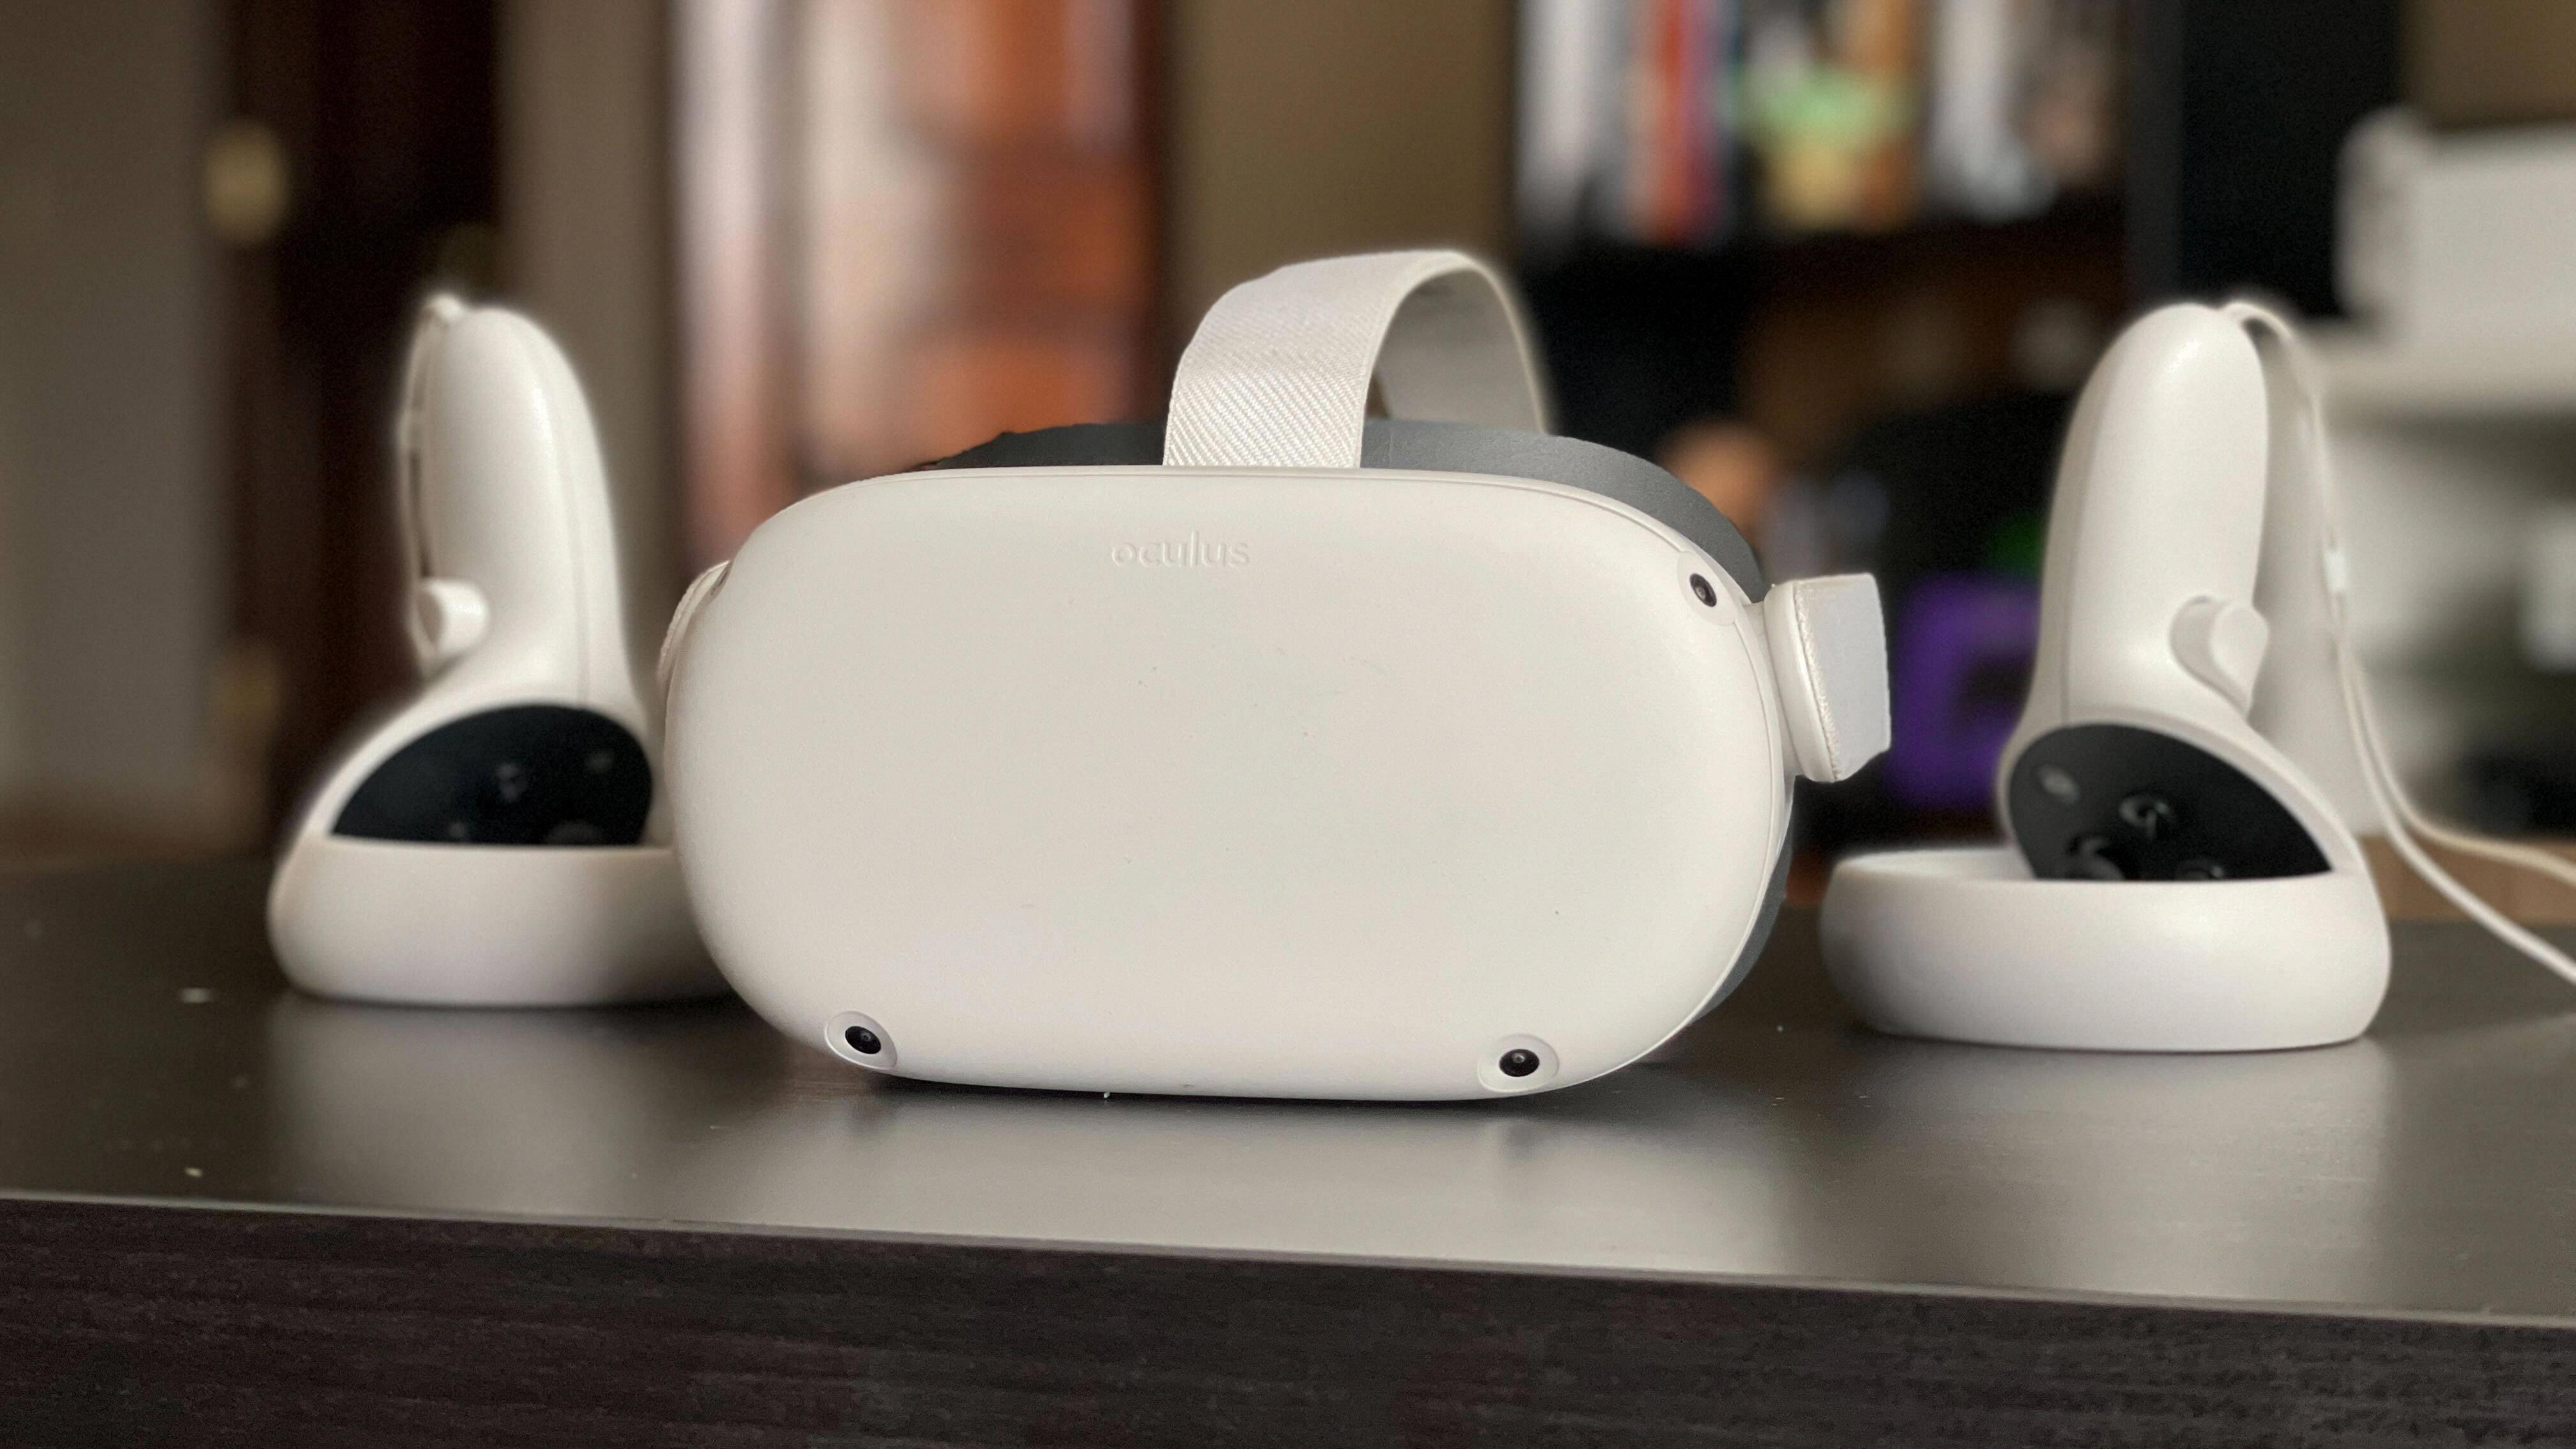 How to Troubleshoot Oculus Quest 2 Stuck on Logo Screen Issues? 9